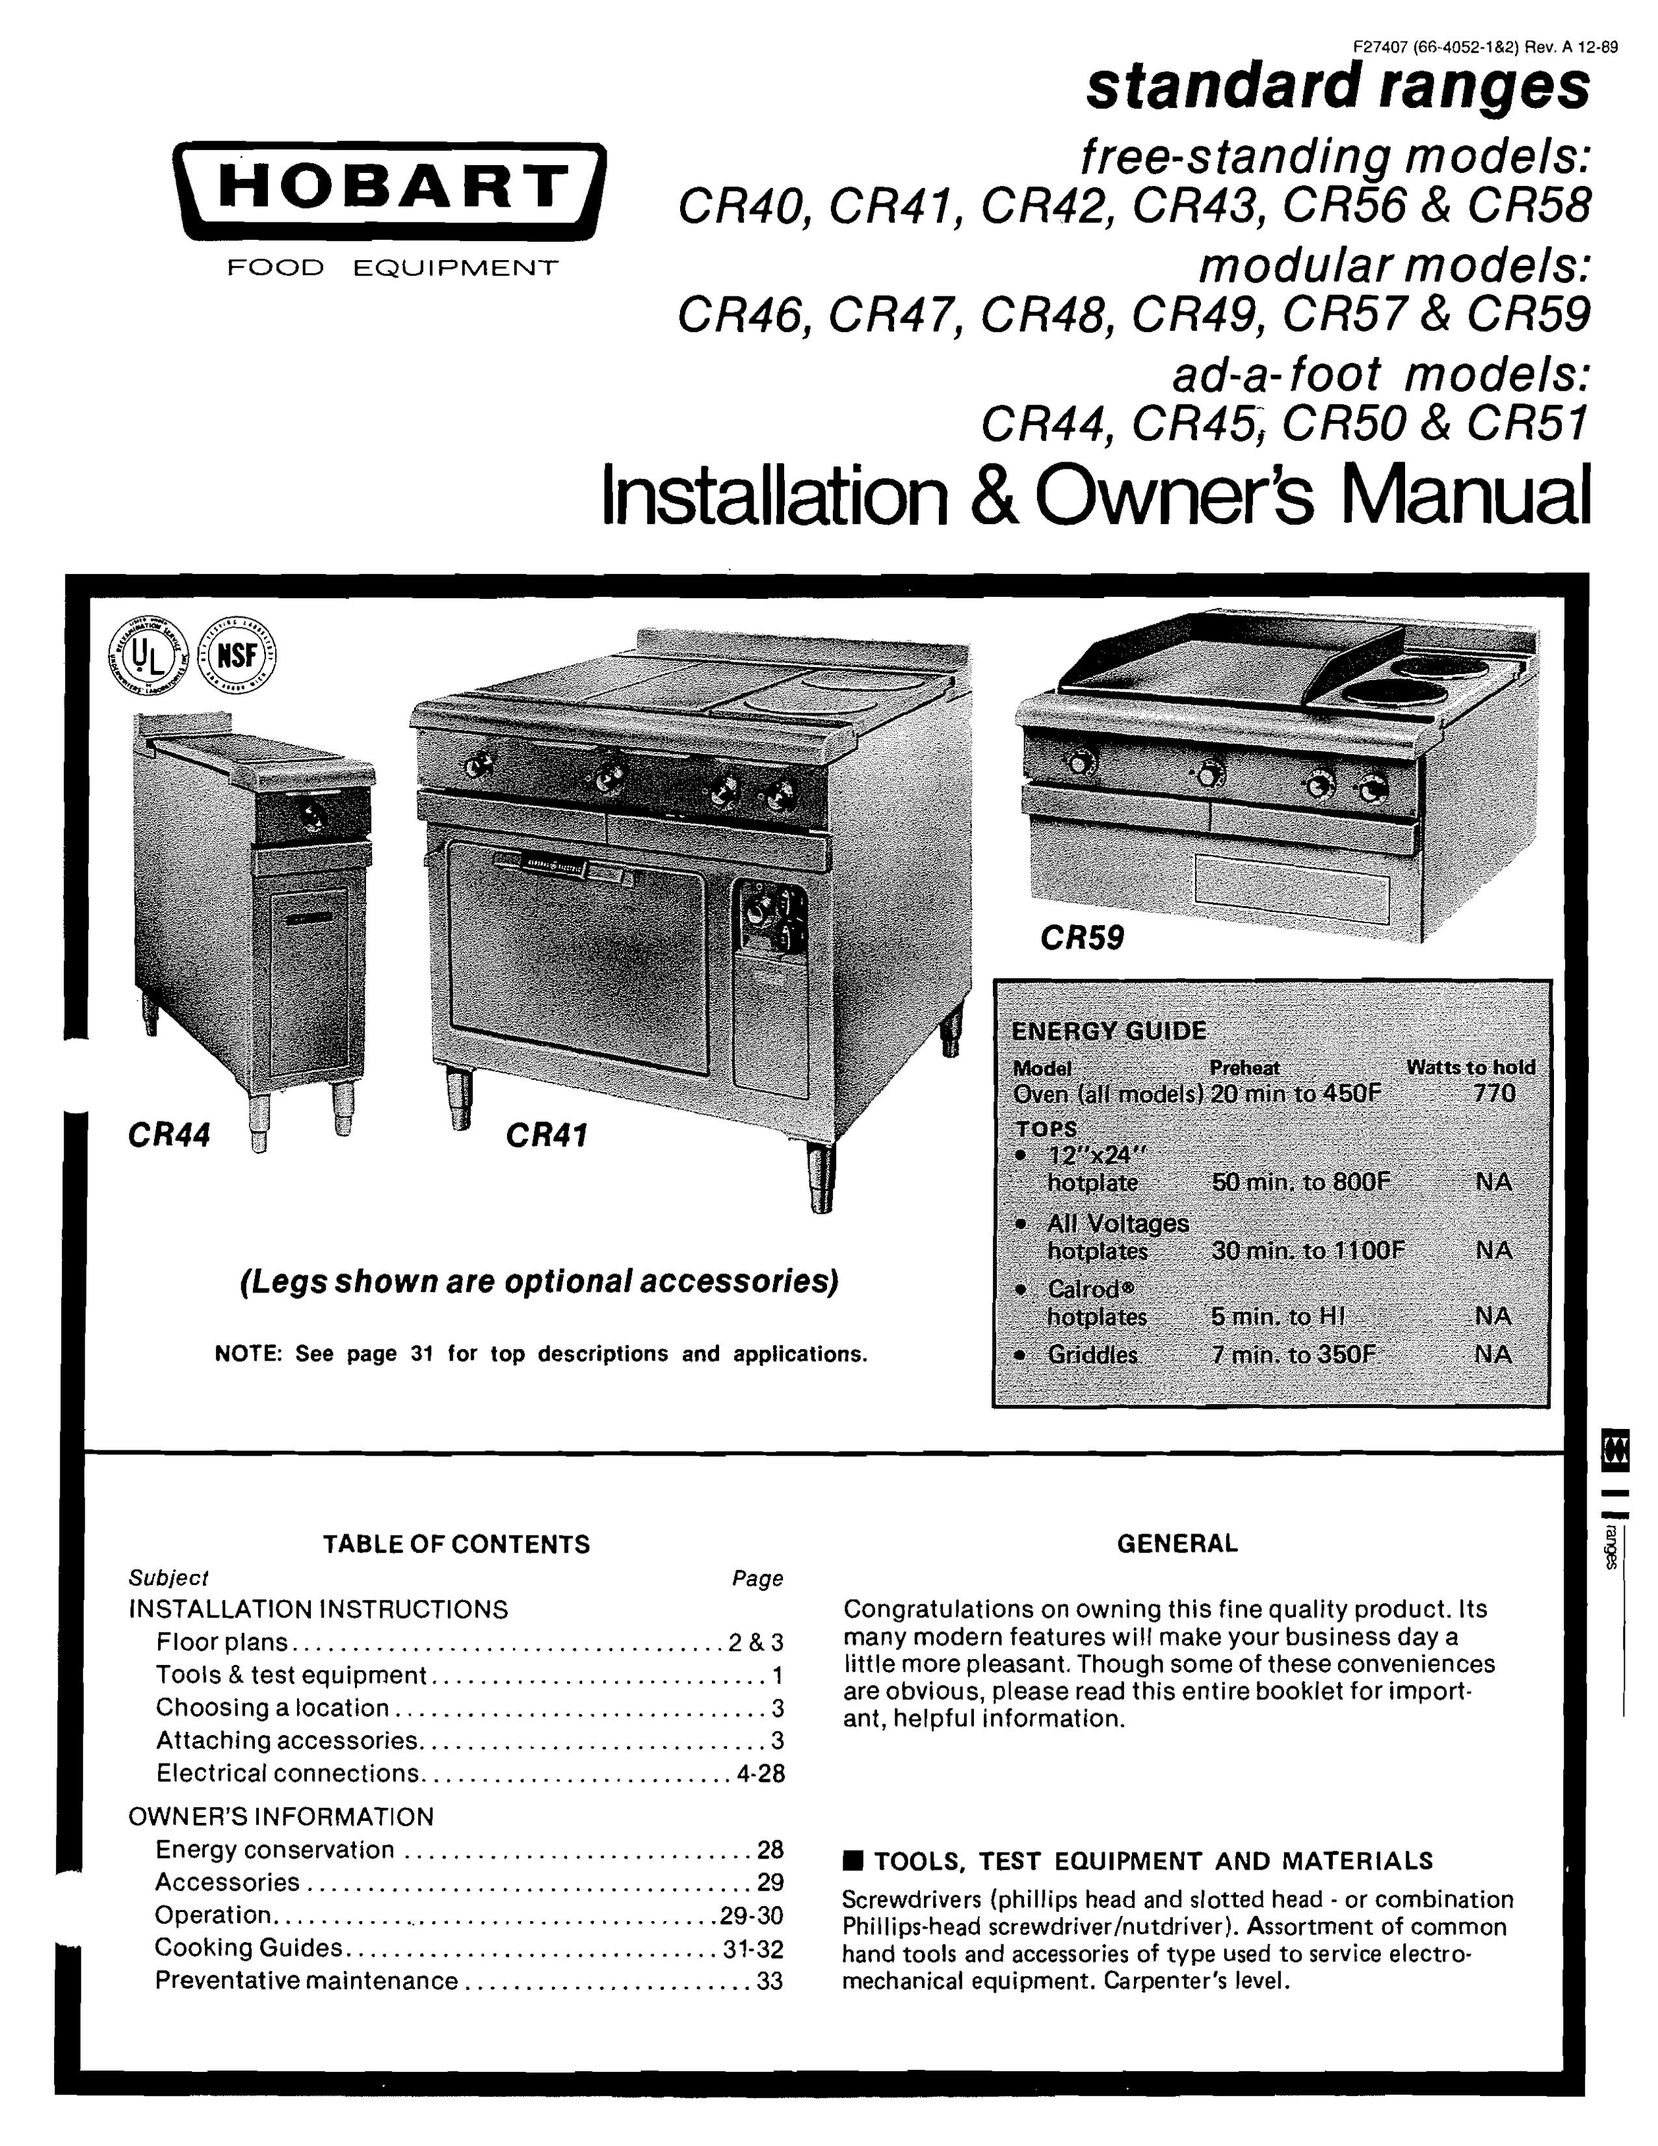 Hobart CR-57 & CR-59 Double Oven User Manual